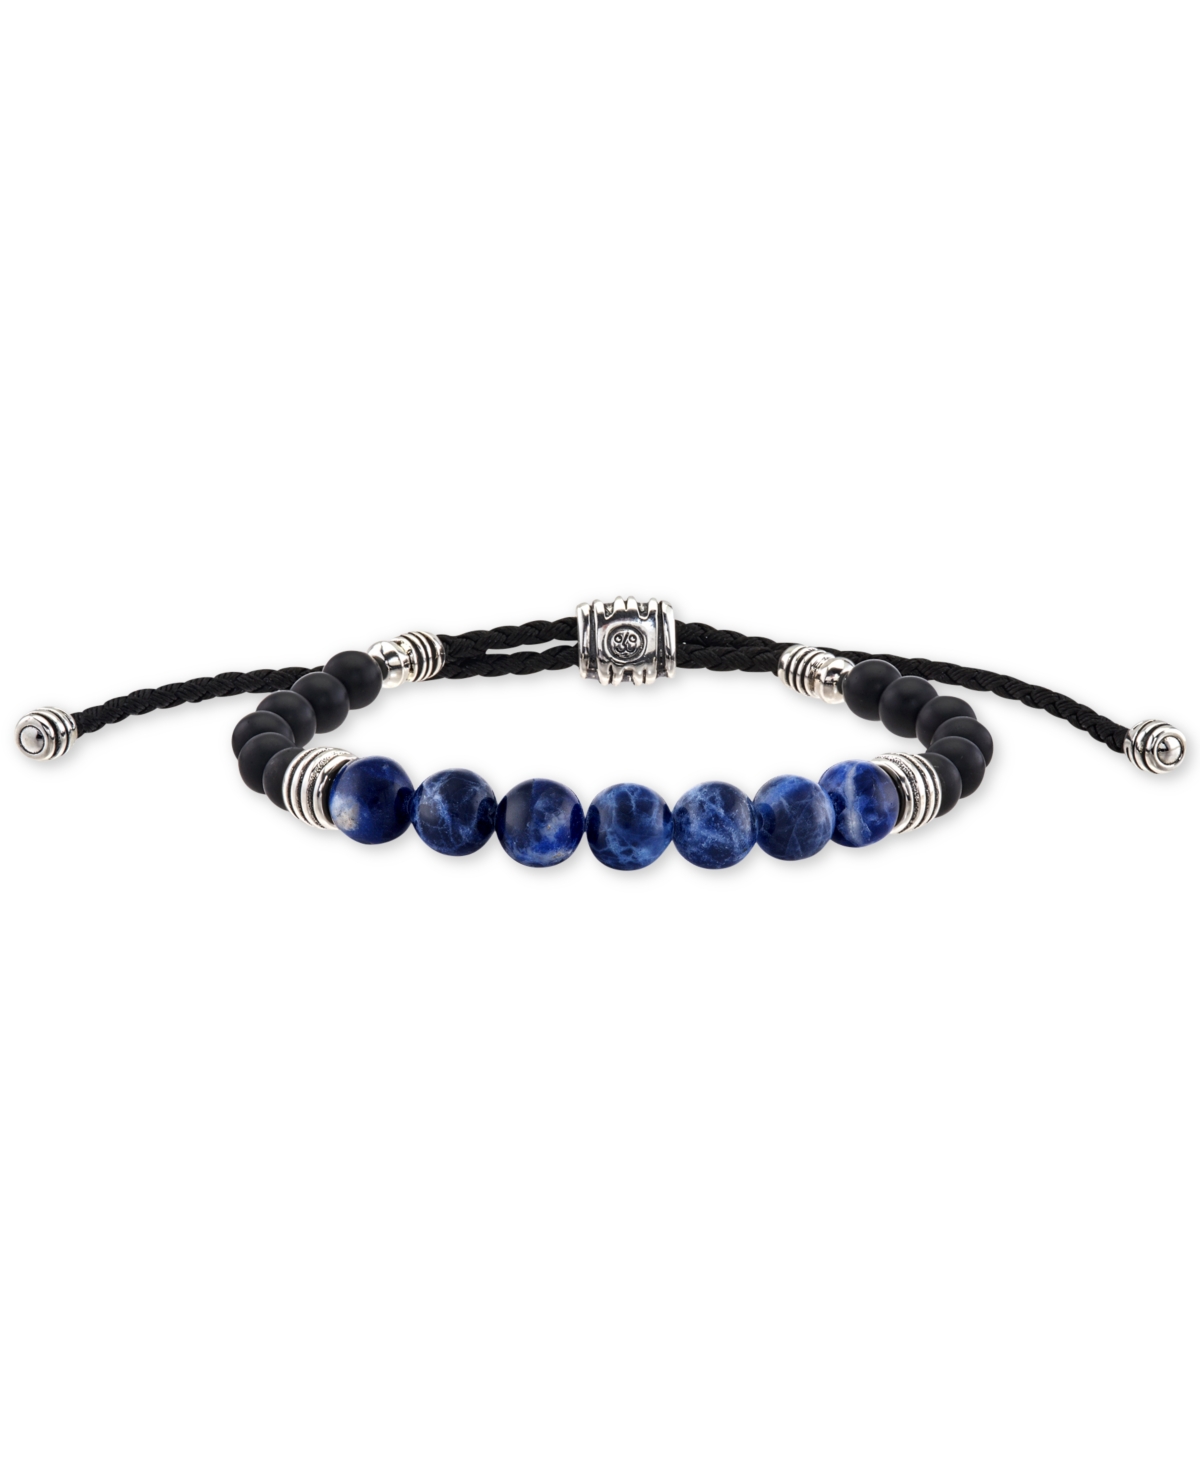 Sodalite (8mm) & Onyx (6mm) Corded Bolo Bracelet in Sterling Silver, Created for Macy's - Silver